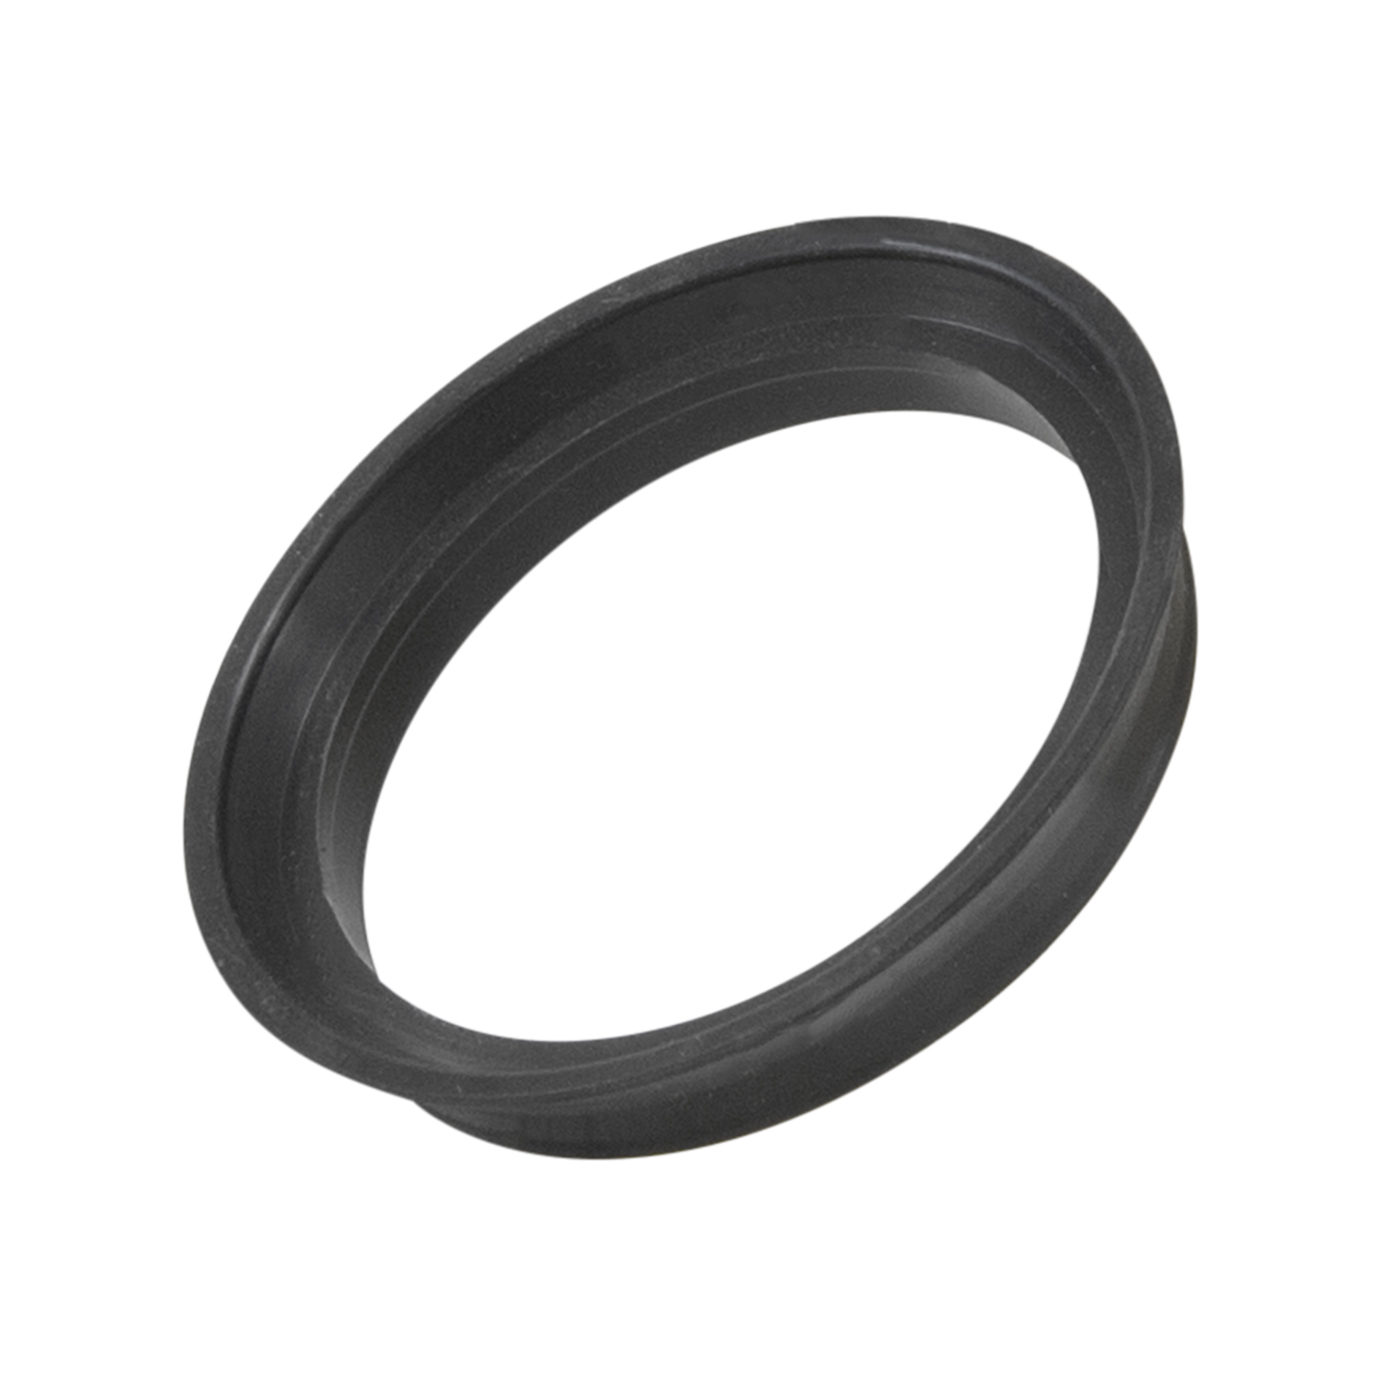 Replacement king-pin rubber seal for Dana 60 